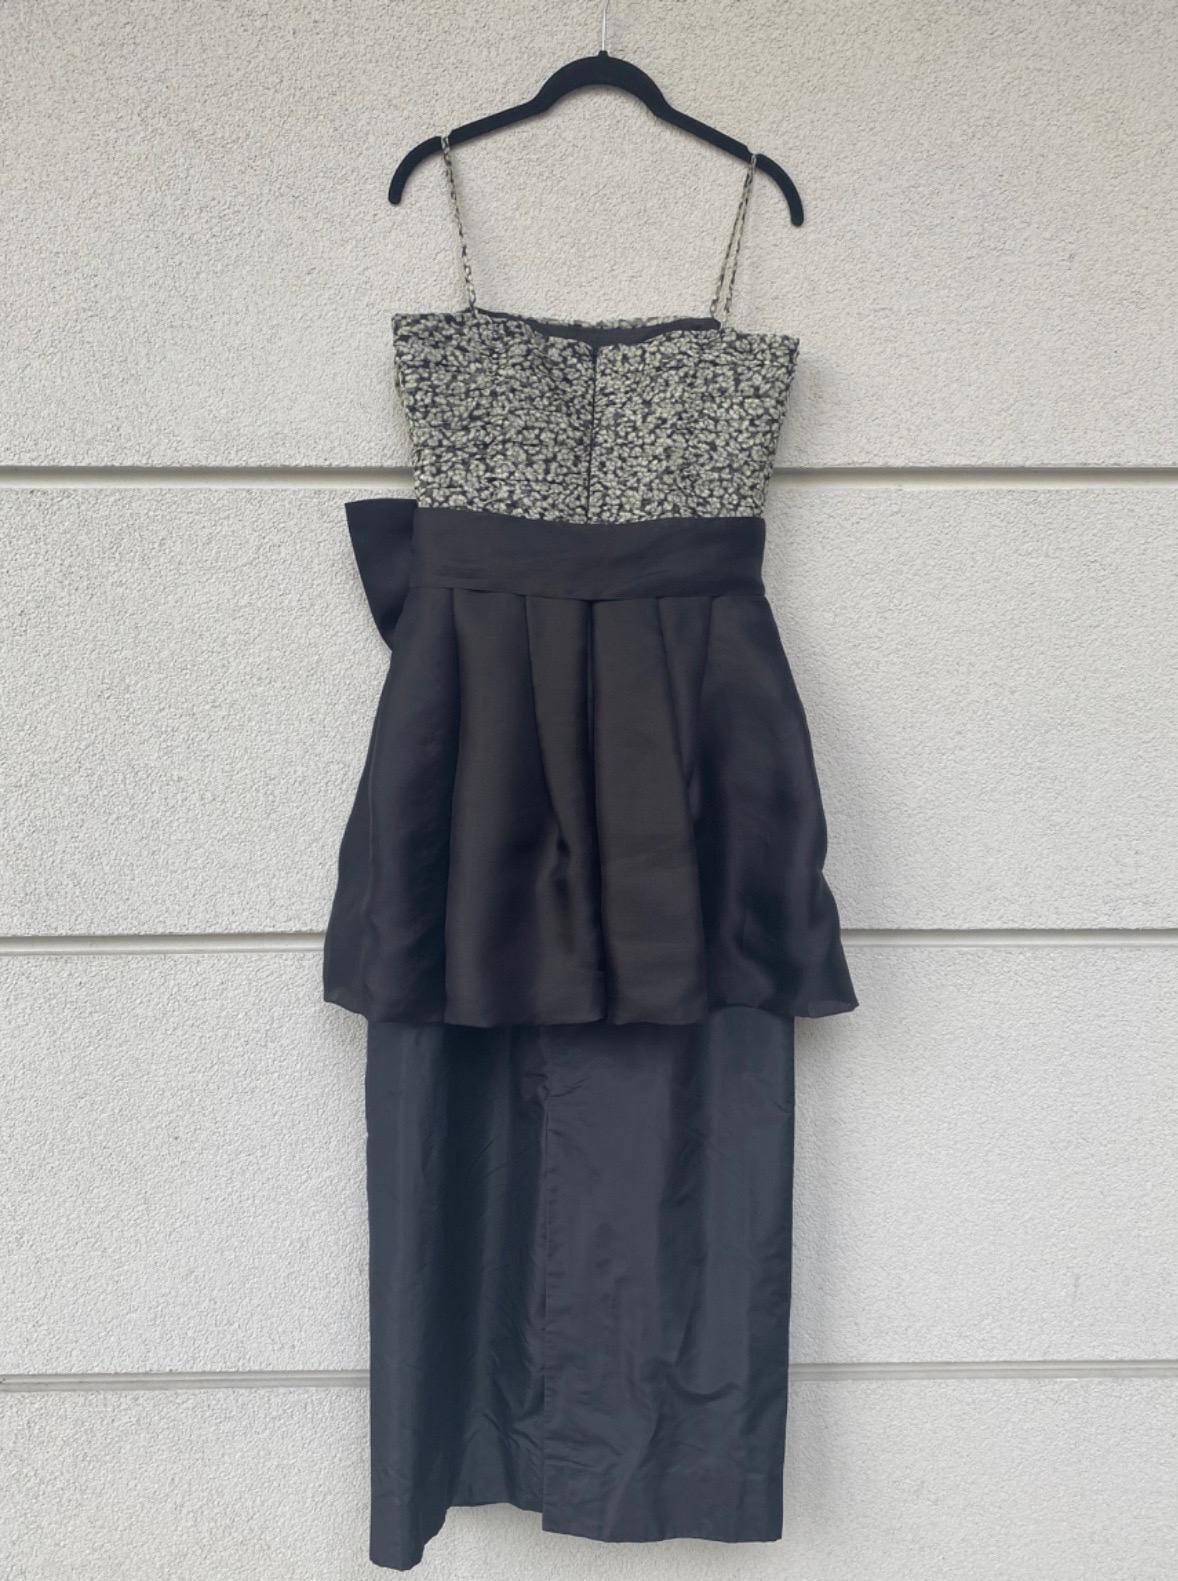 Yves Saint Laurent, Rive Gauche Dress.
In black silk featuring black and white pattern on the top and a big ornamental bow.
Zip closure on the back.
Size 42 Italian 
Bust 40 cm
Waist 36 cm
Length 120 cm
Vintage piece but very good condition. 
It